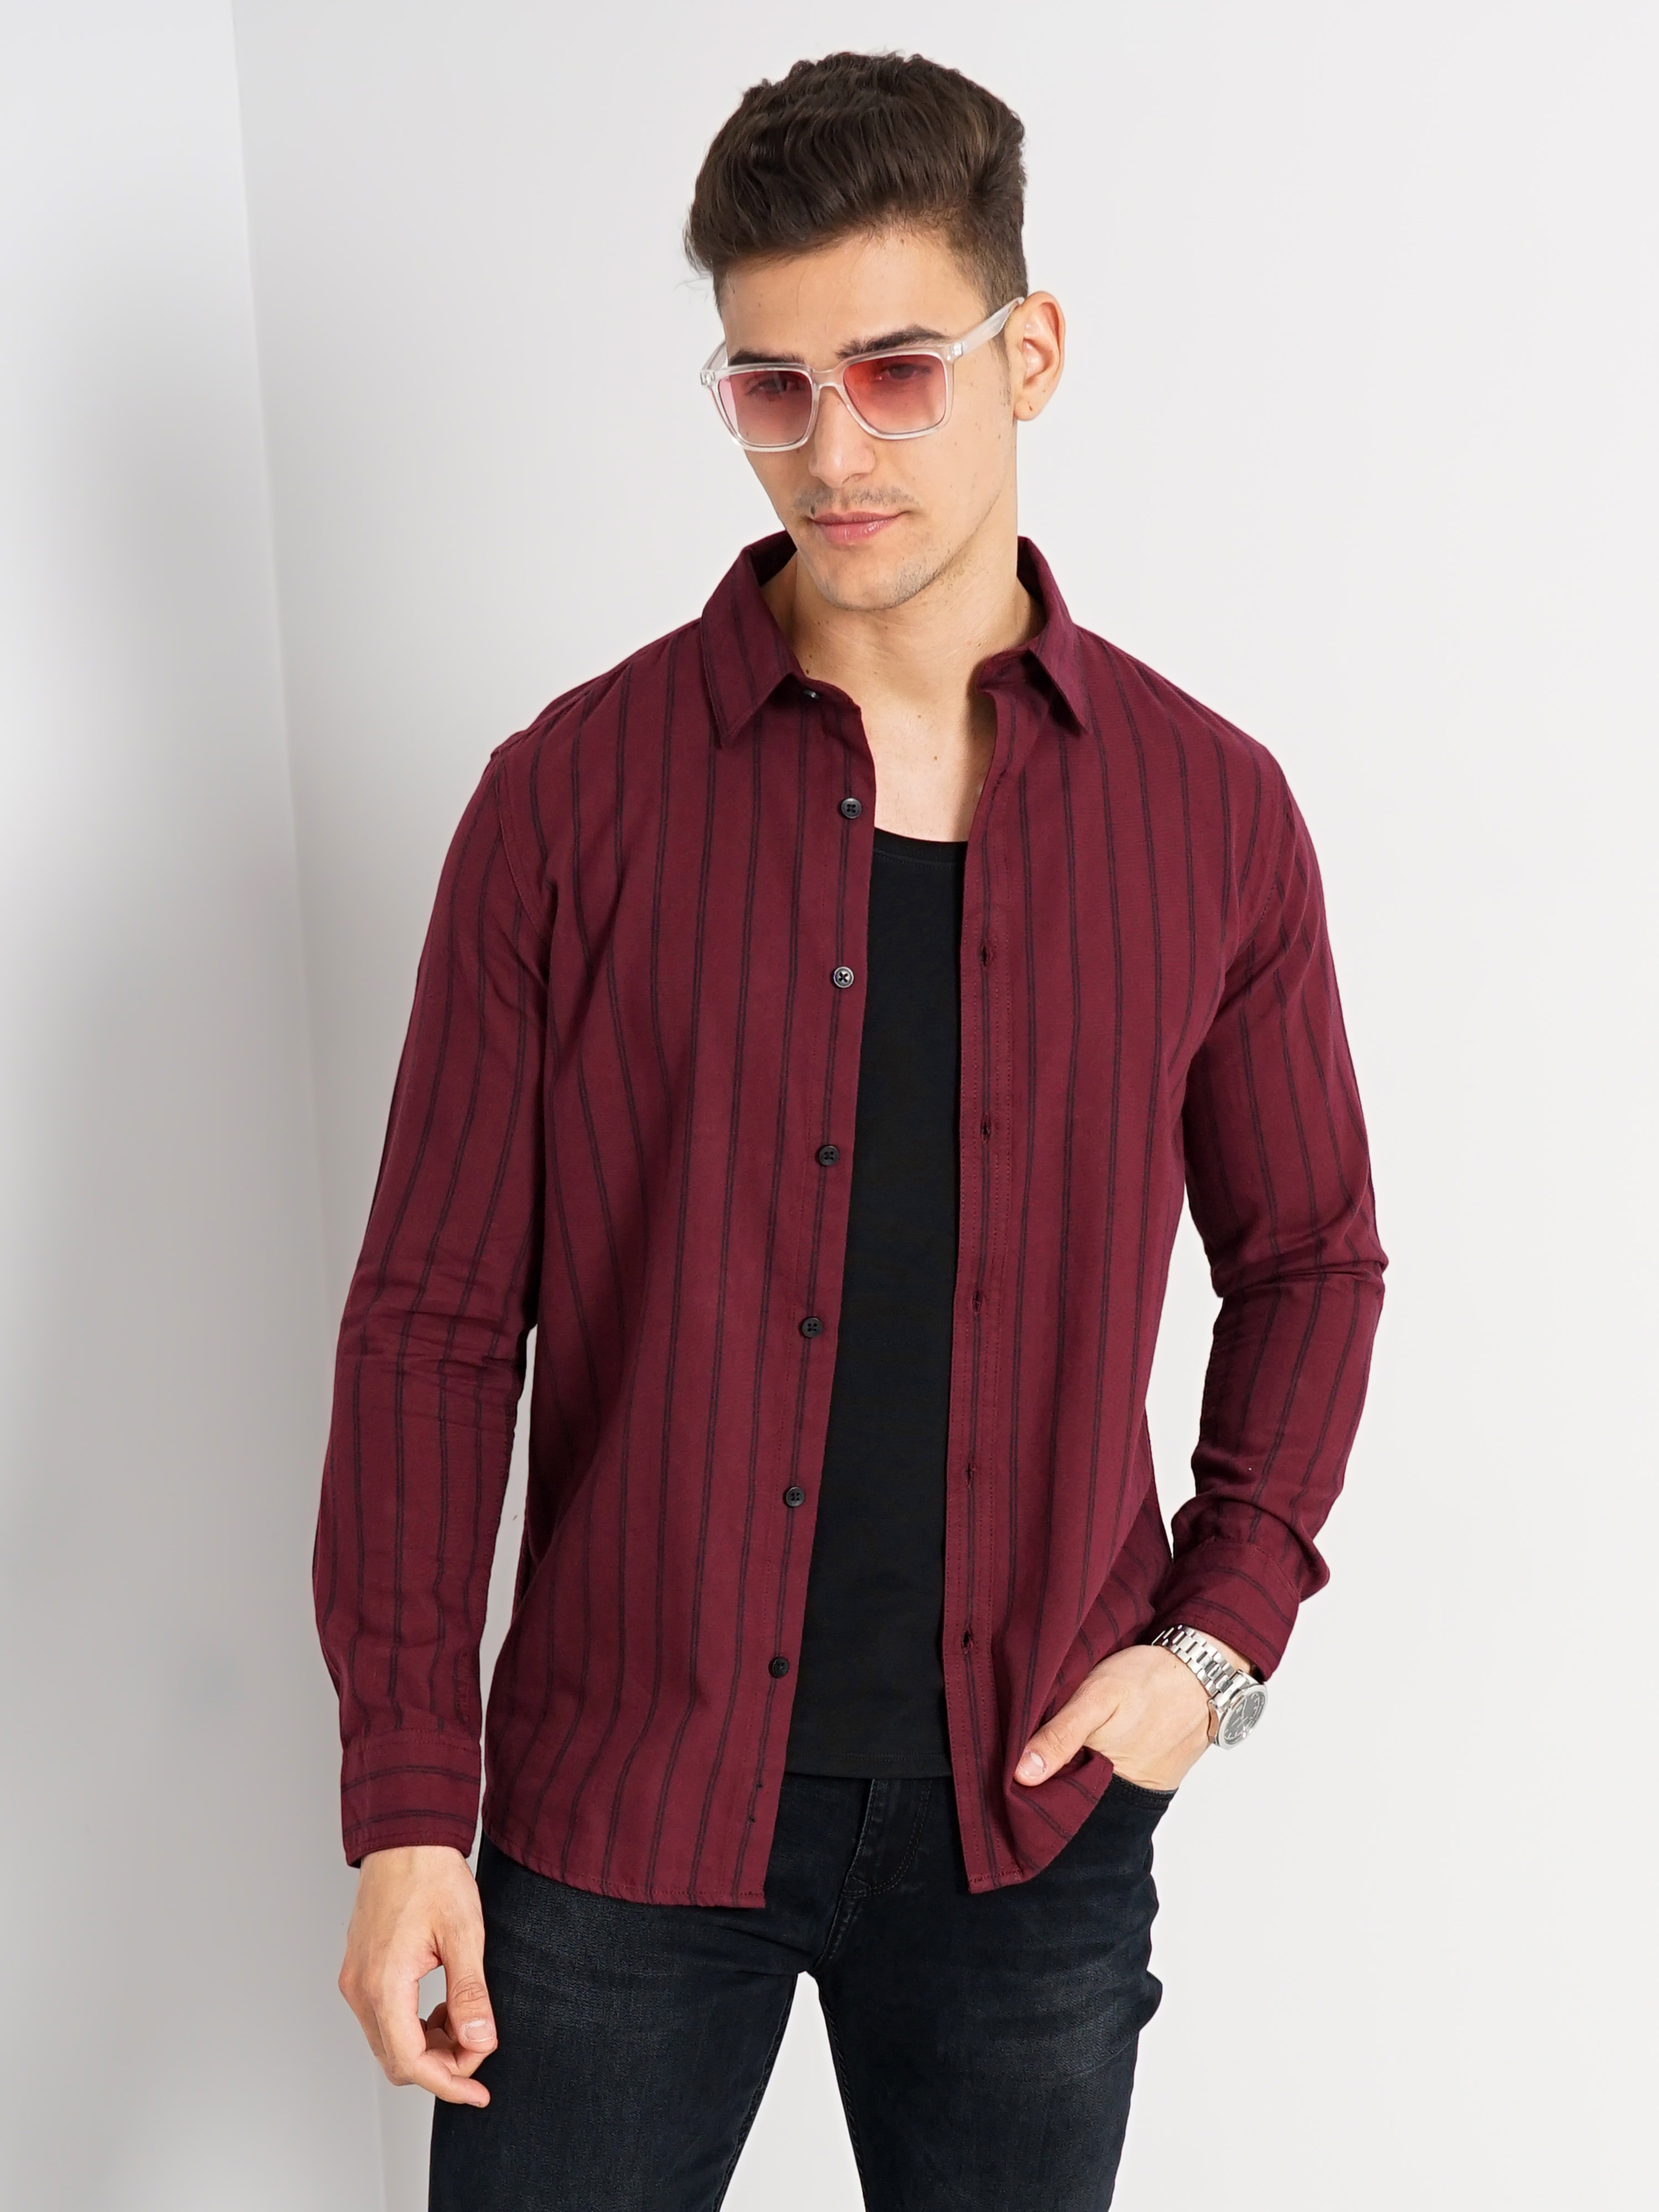 celio | Men's Red Striped Casual Shirts